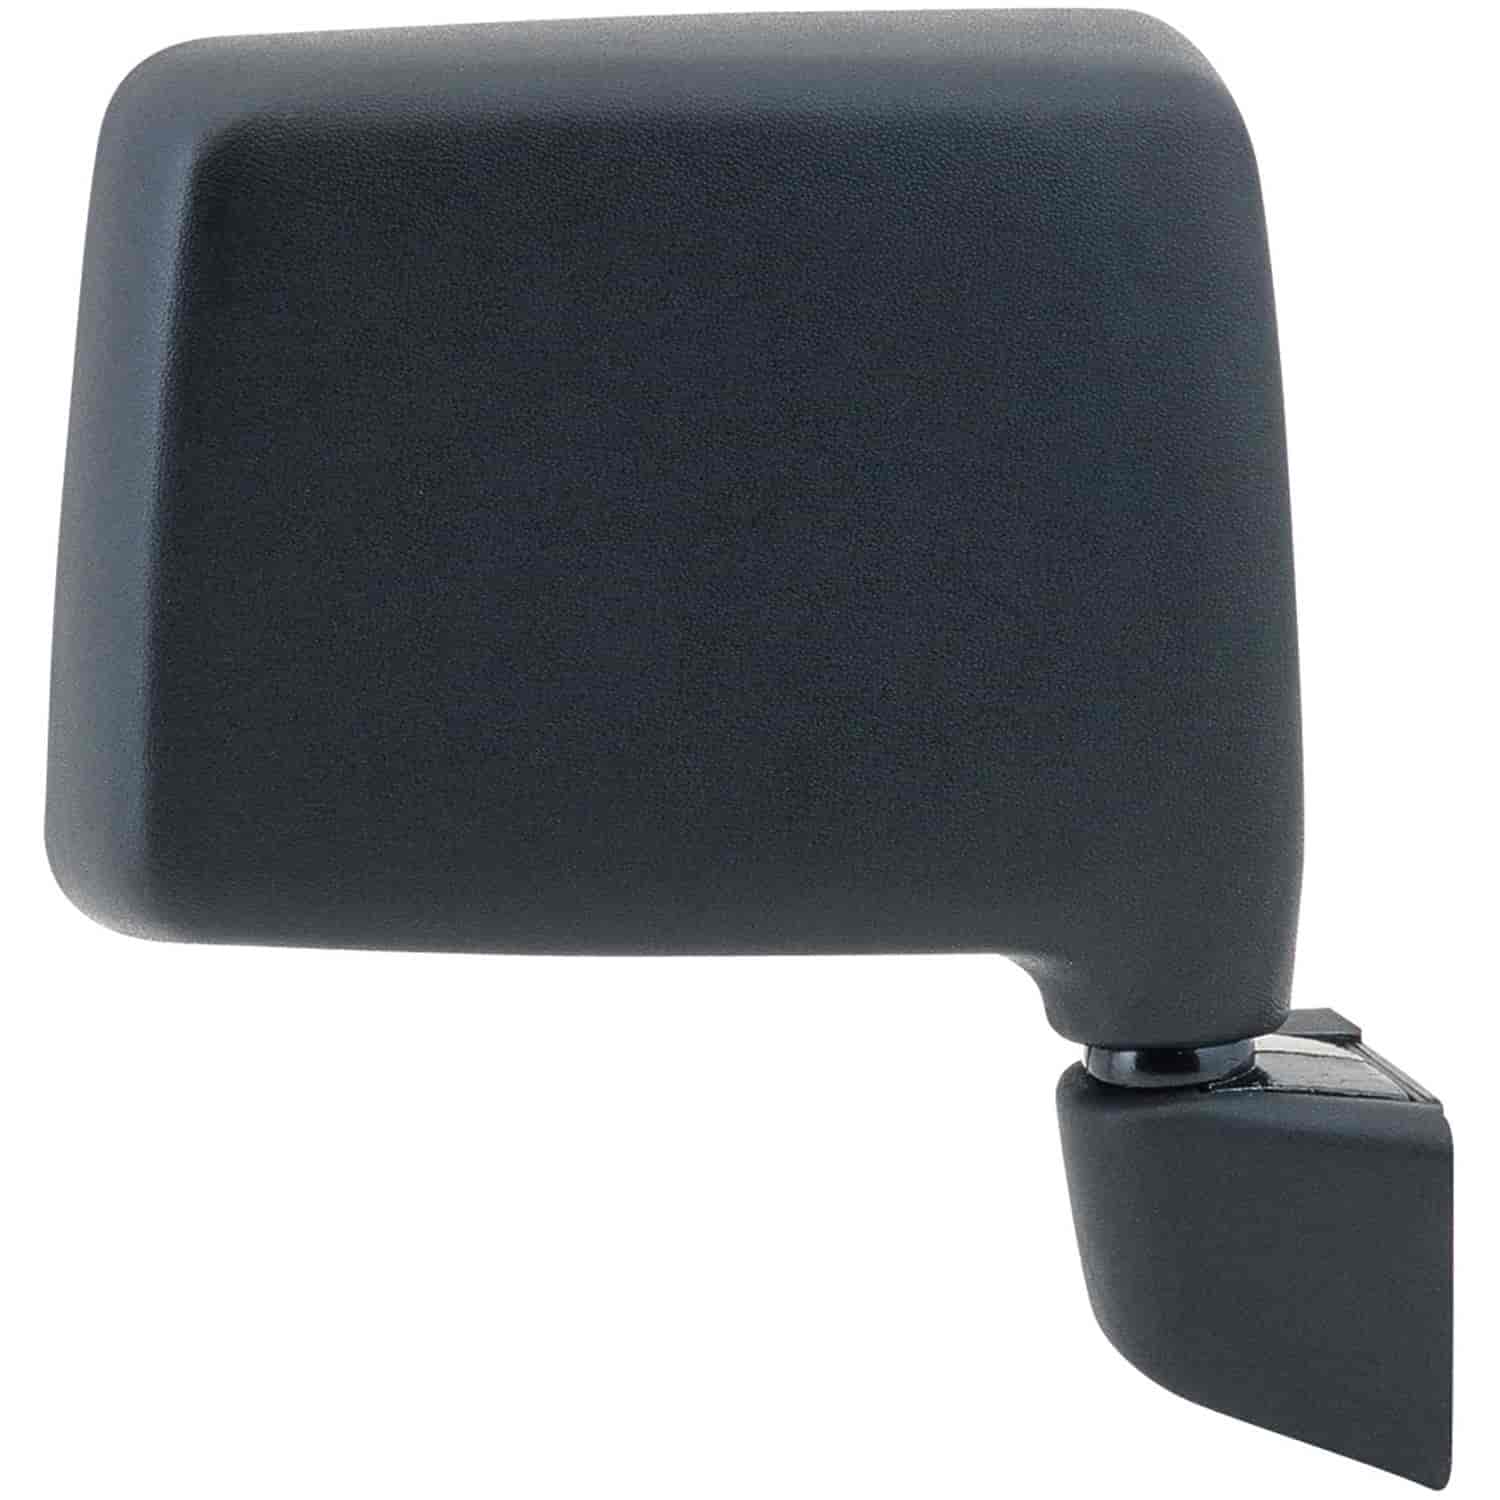 OEM Style Replacement mirror for 87-95 Suzuki Samurai passenger side mirror tested to fit and functi